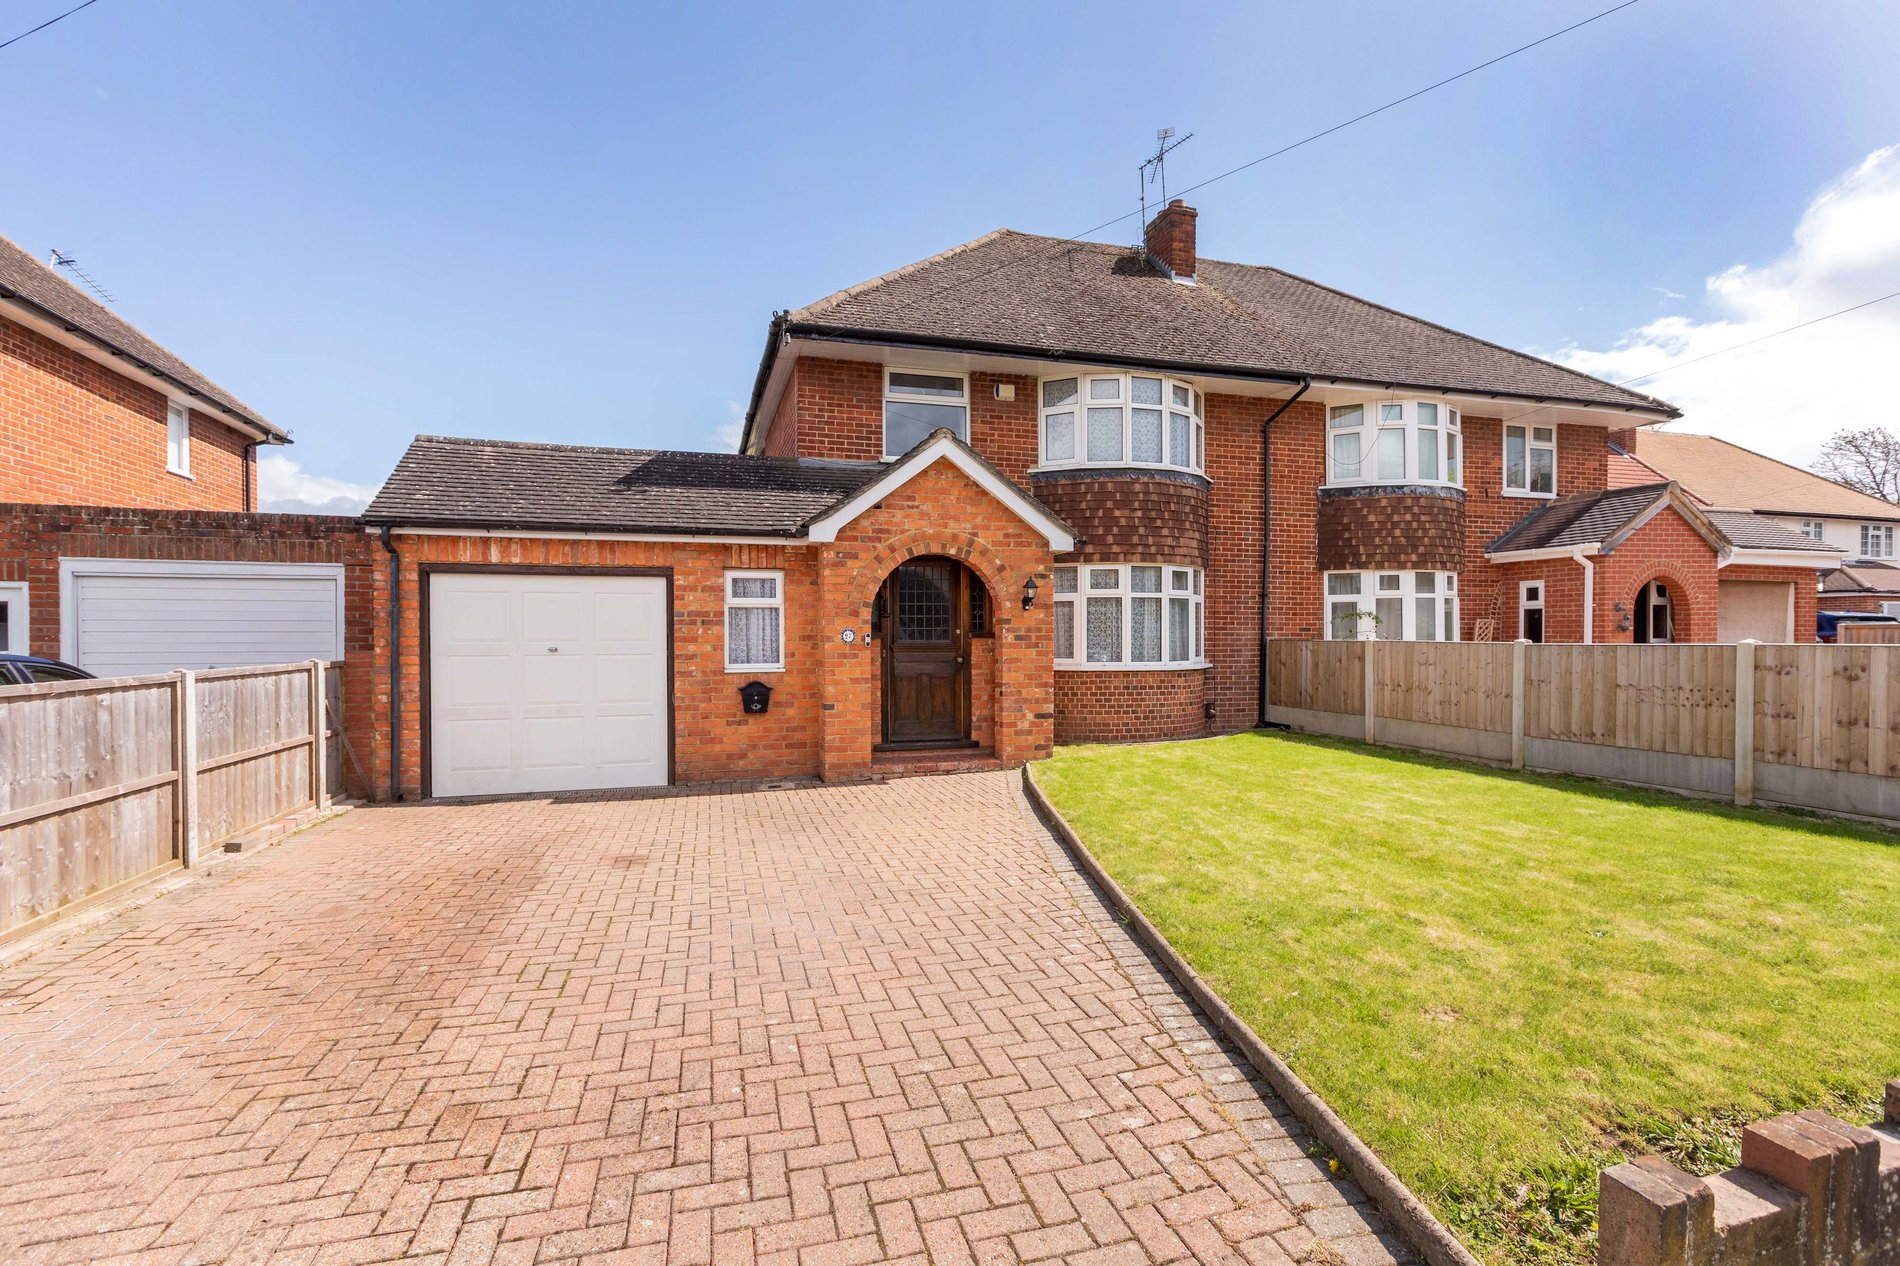 3 bed semi-detached house for sale in Blenheim Road, Langley - Property Image 1